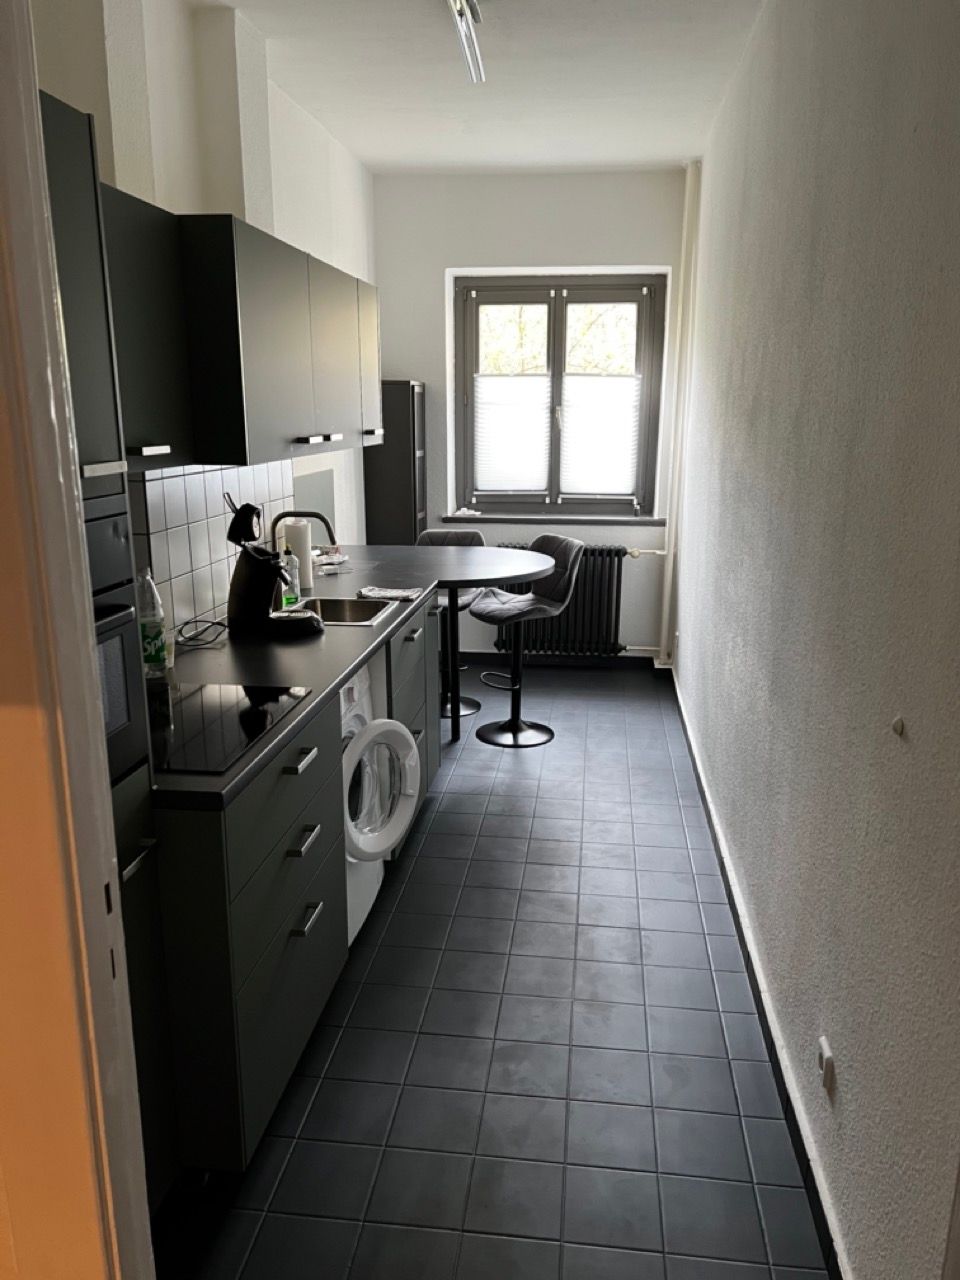 Awesome apartment in Wilmersdorf (Berlin)